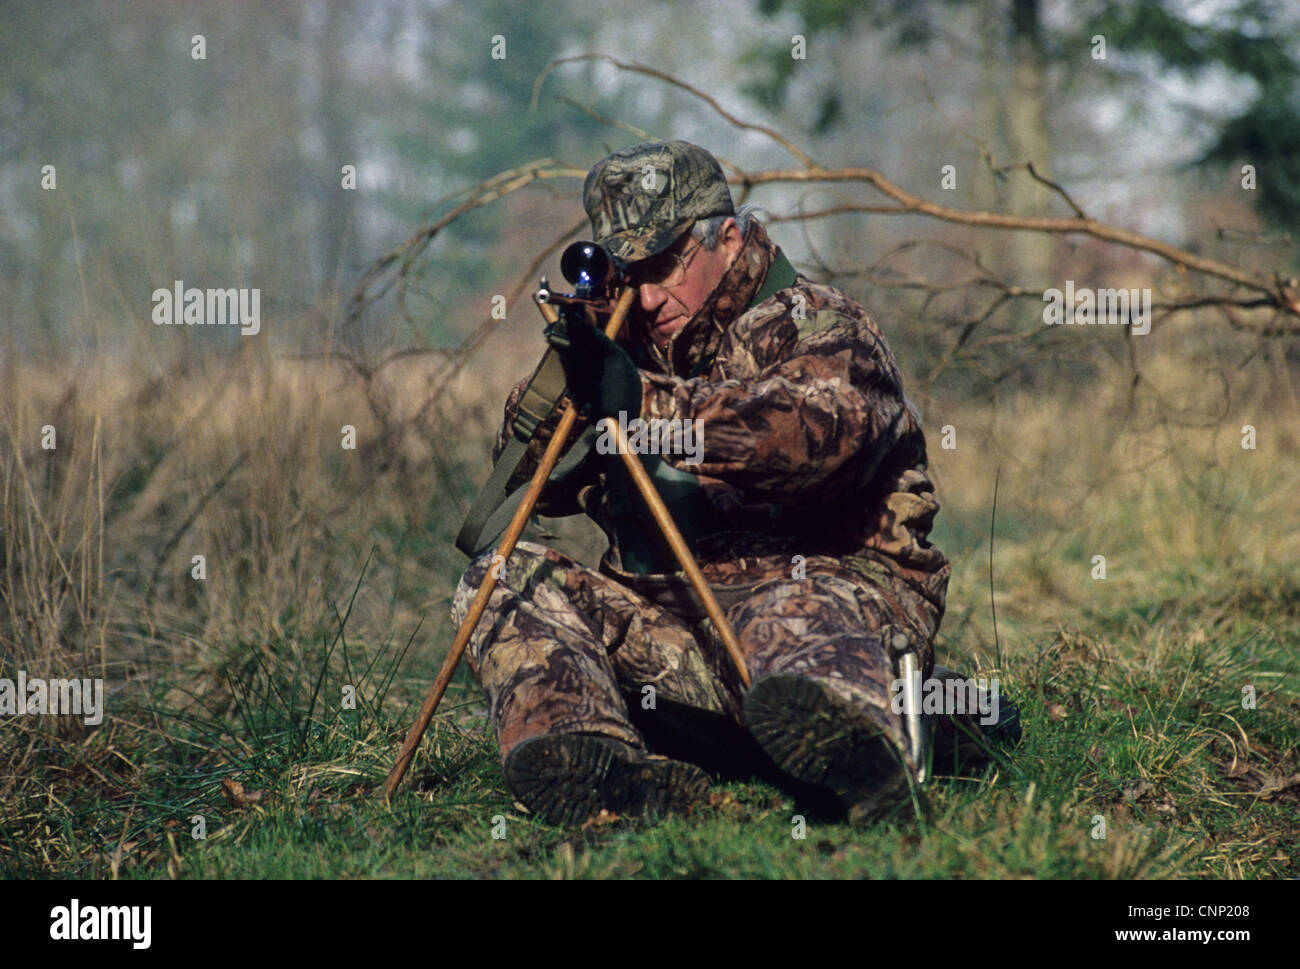 Hunting, deer stalker sitting on low seat and using tripod to support rifle, England Stock Photo